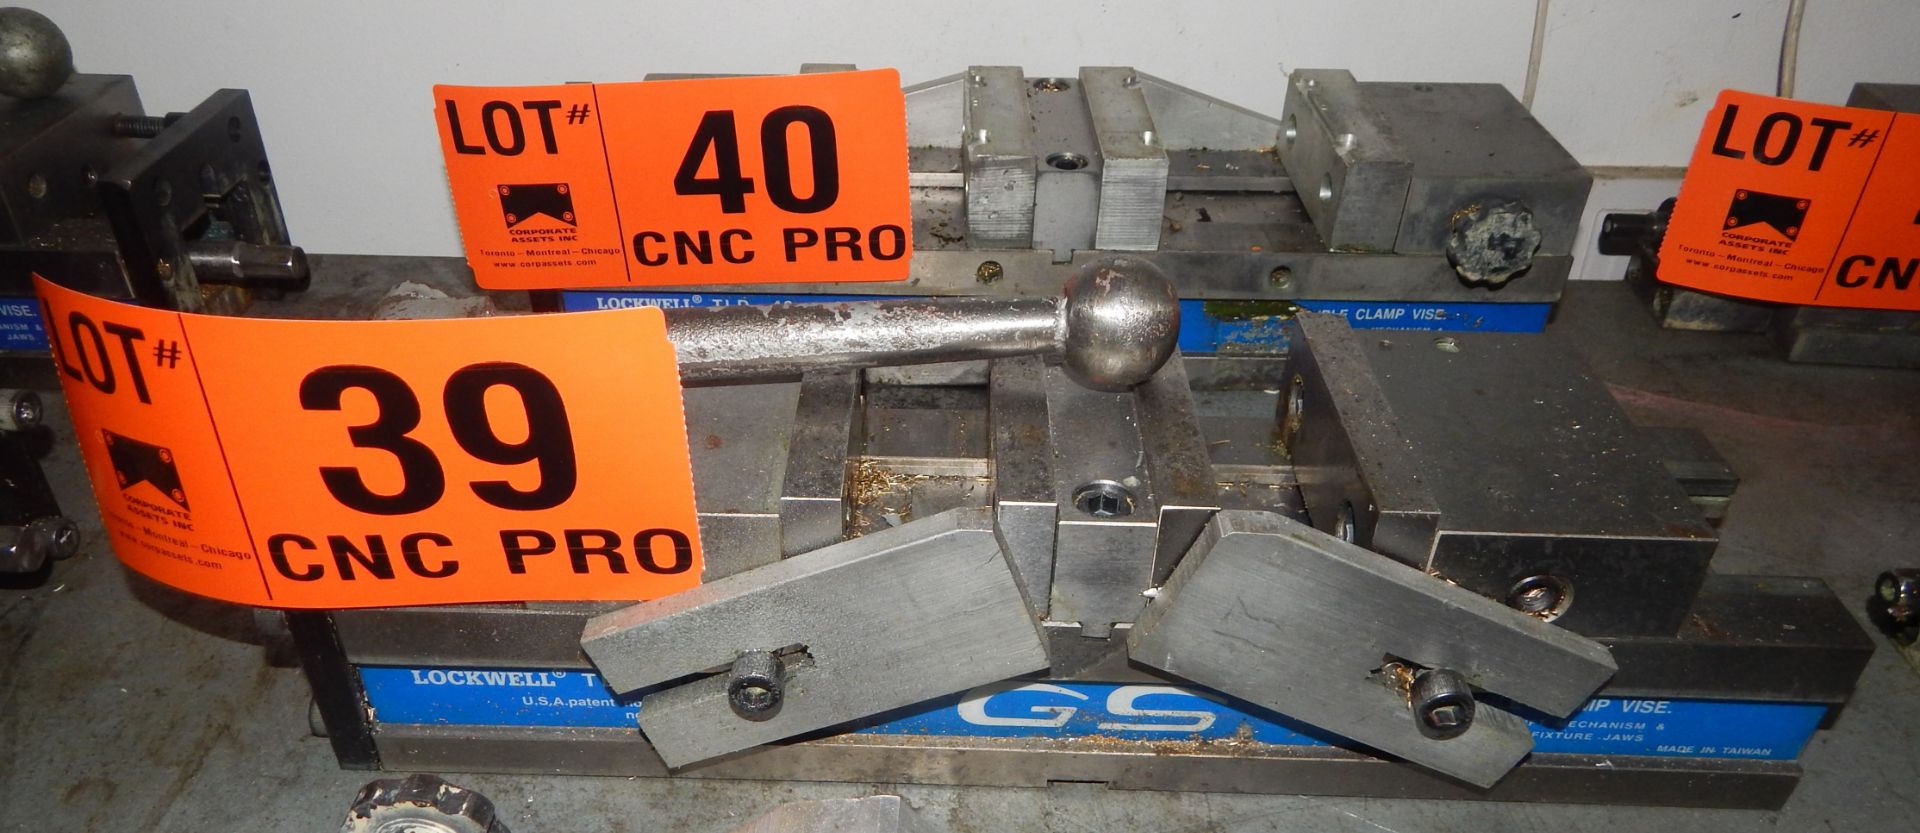 4" GS DOUBLE CLAMP VISE